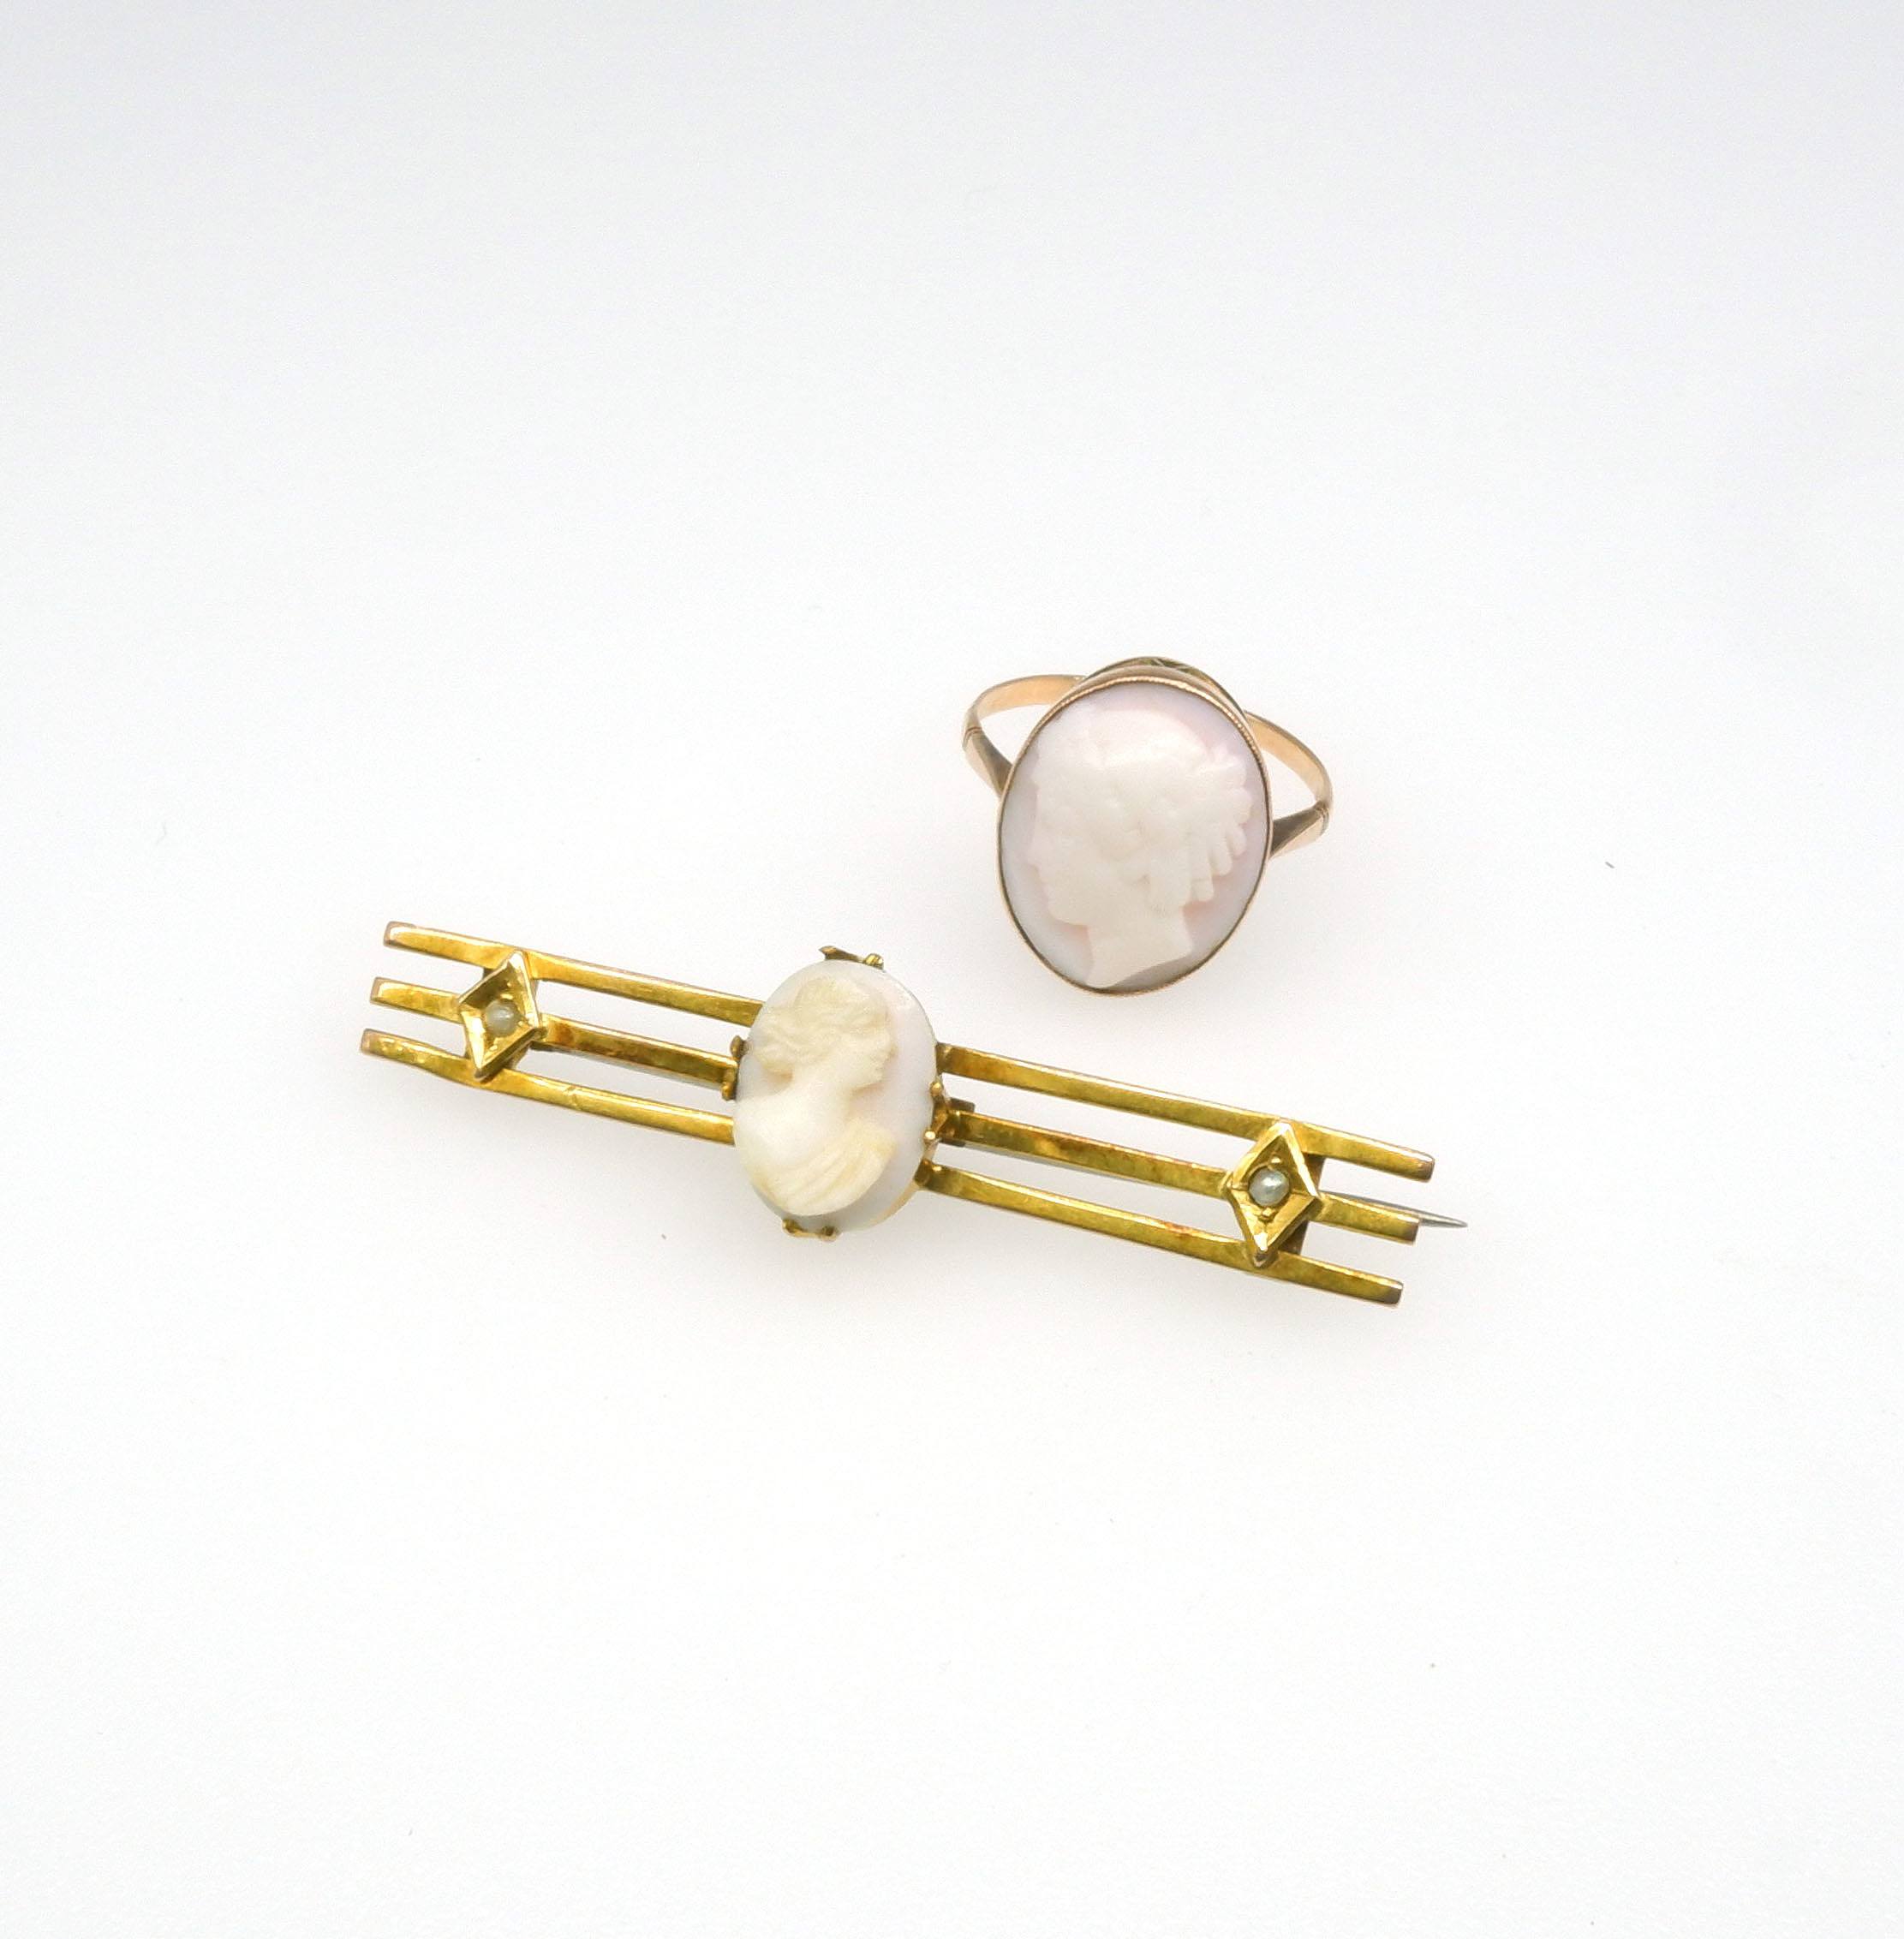 '9ct Yellow Gold Ring with Pale Pink Shell Ladies Head Cameo and 9ct Yellow Gold Triple Bar Brooch with White Cameo and Half Seed Pearls'